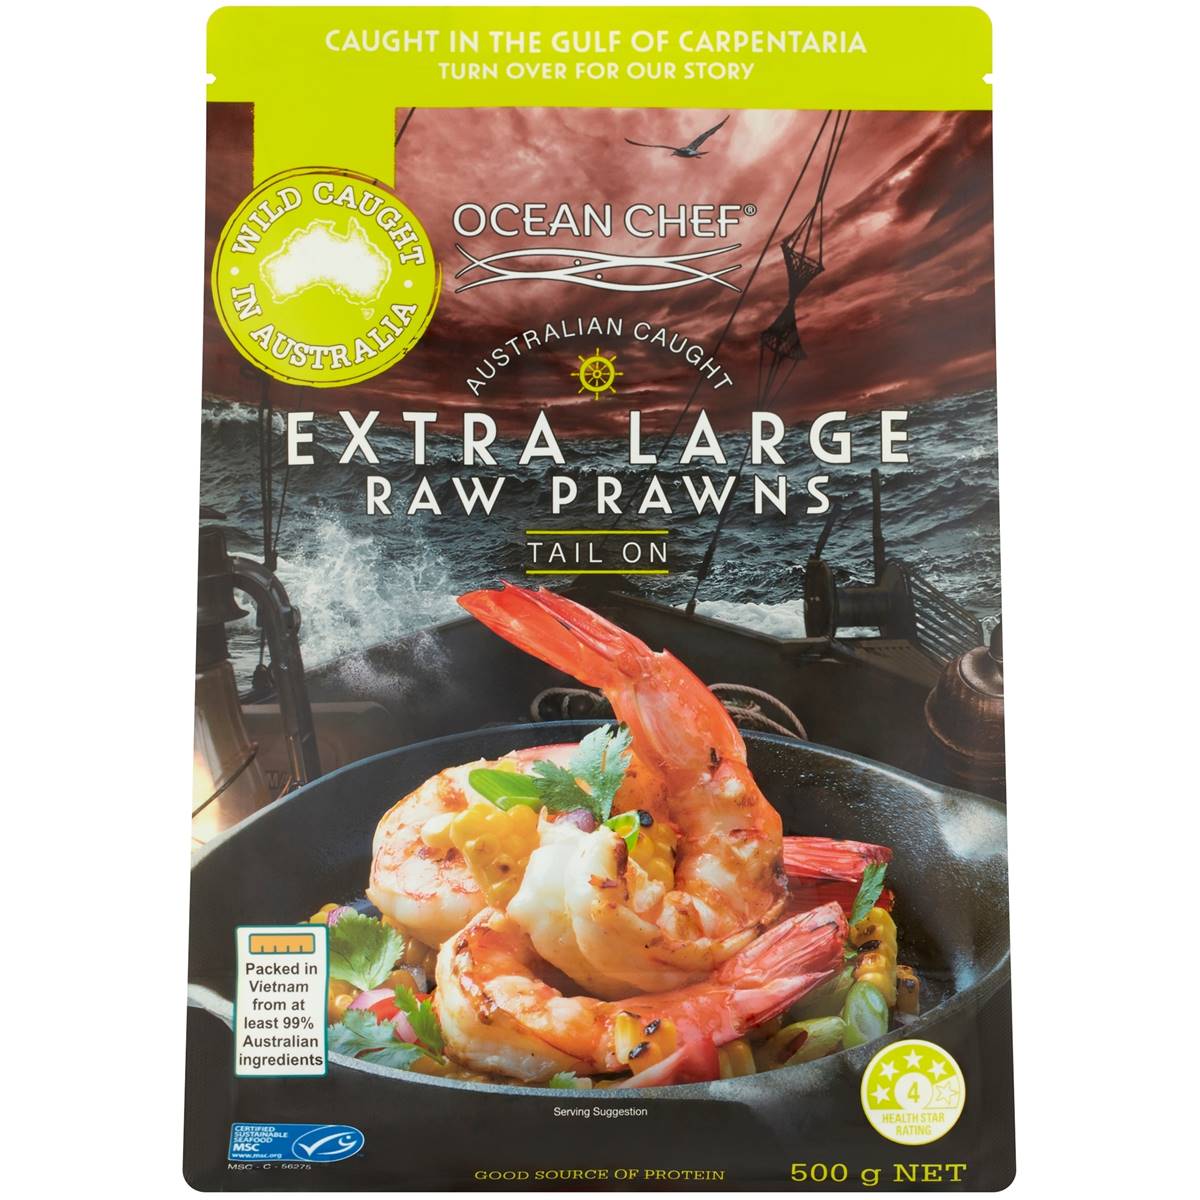 Calories in Ocean Chef Extra Large Raw Prawn Tail On